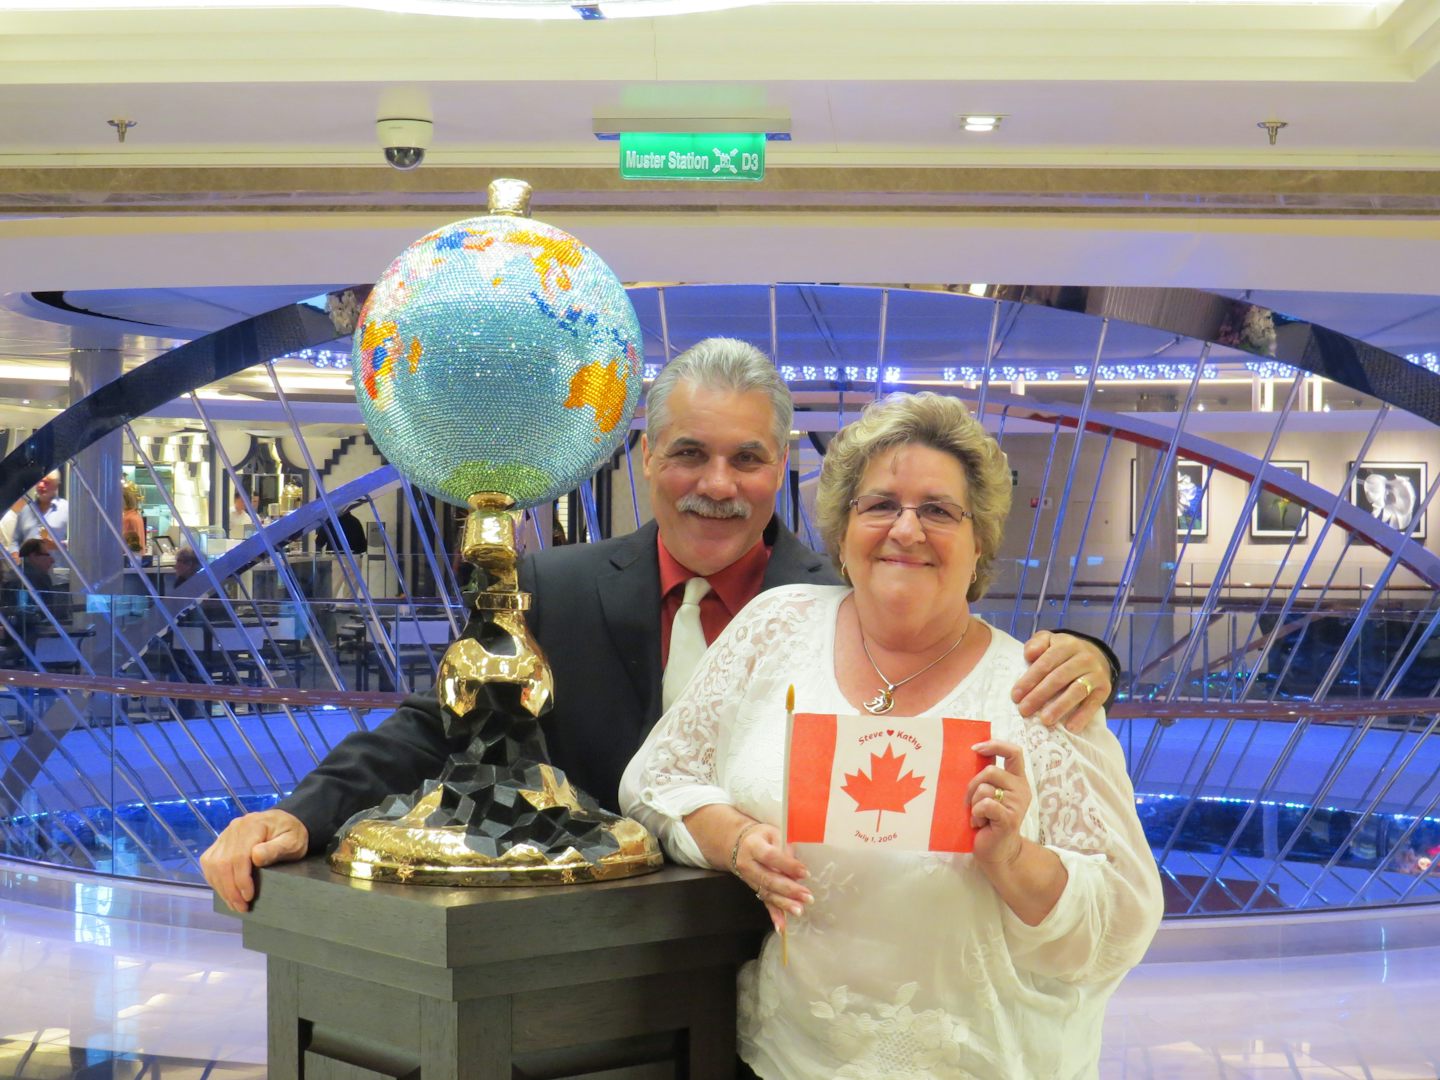 Celebrating our Anniversary and Canada Day on the Koningsdam